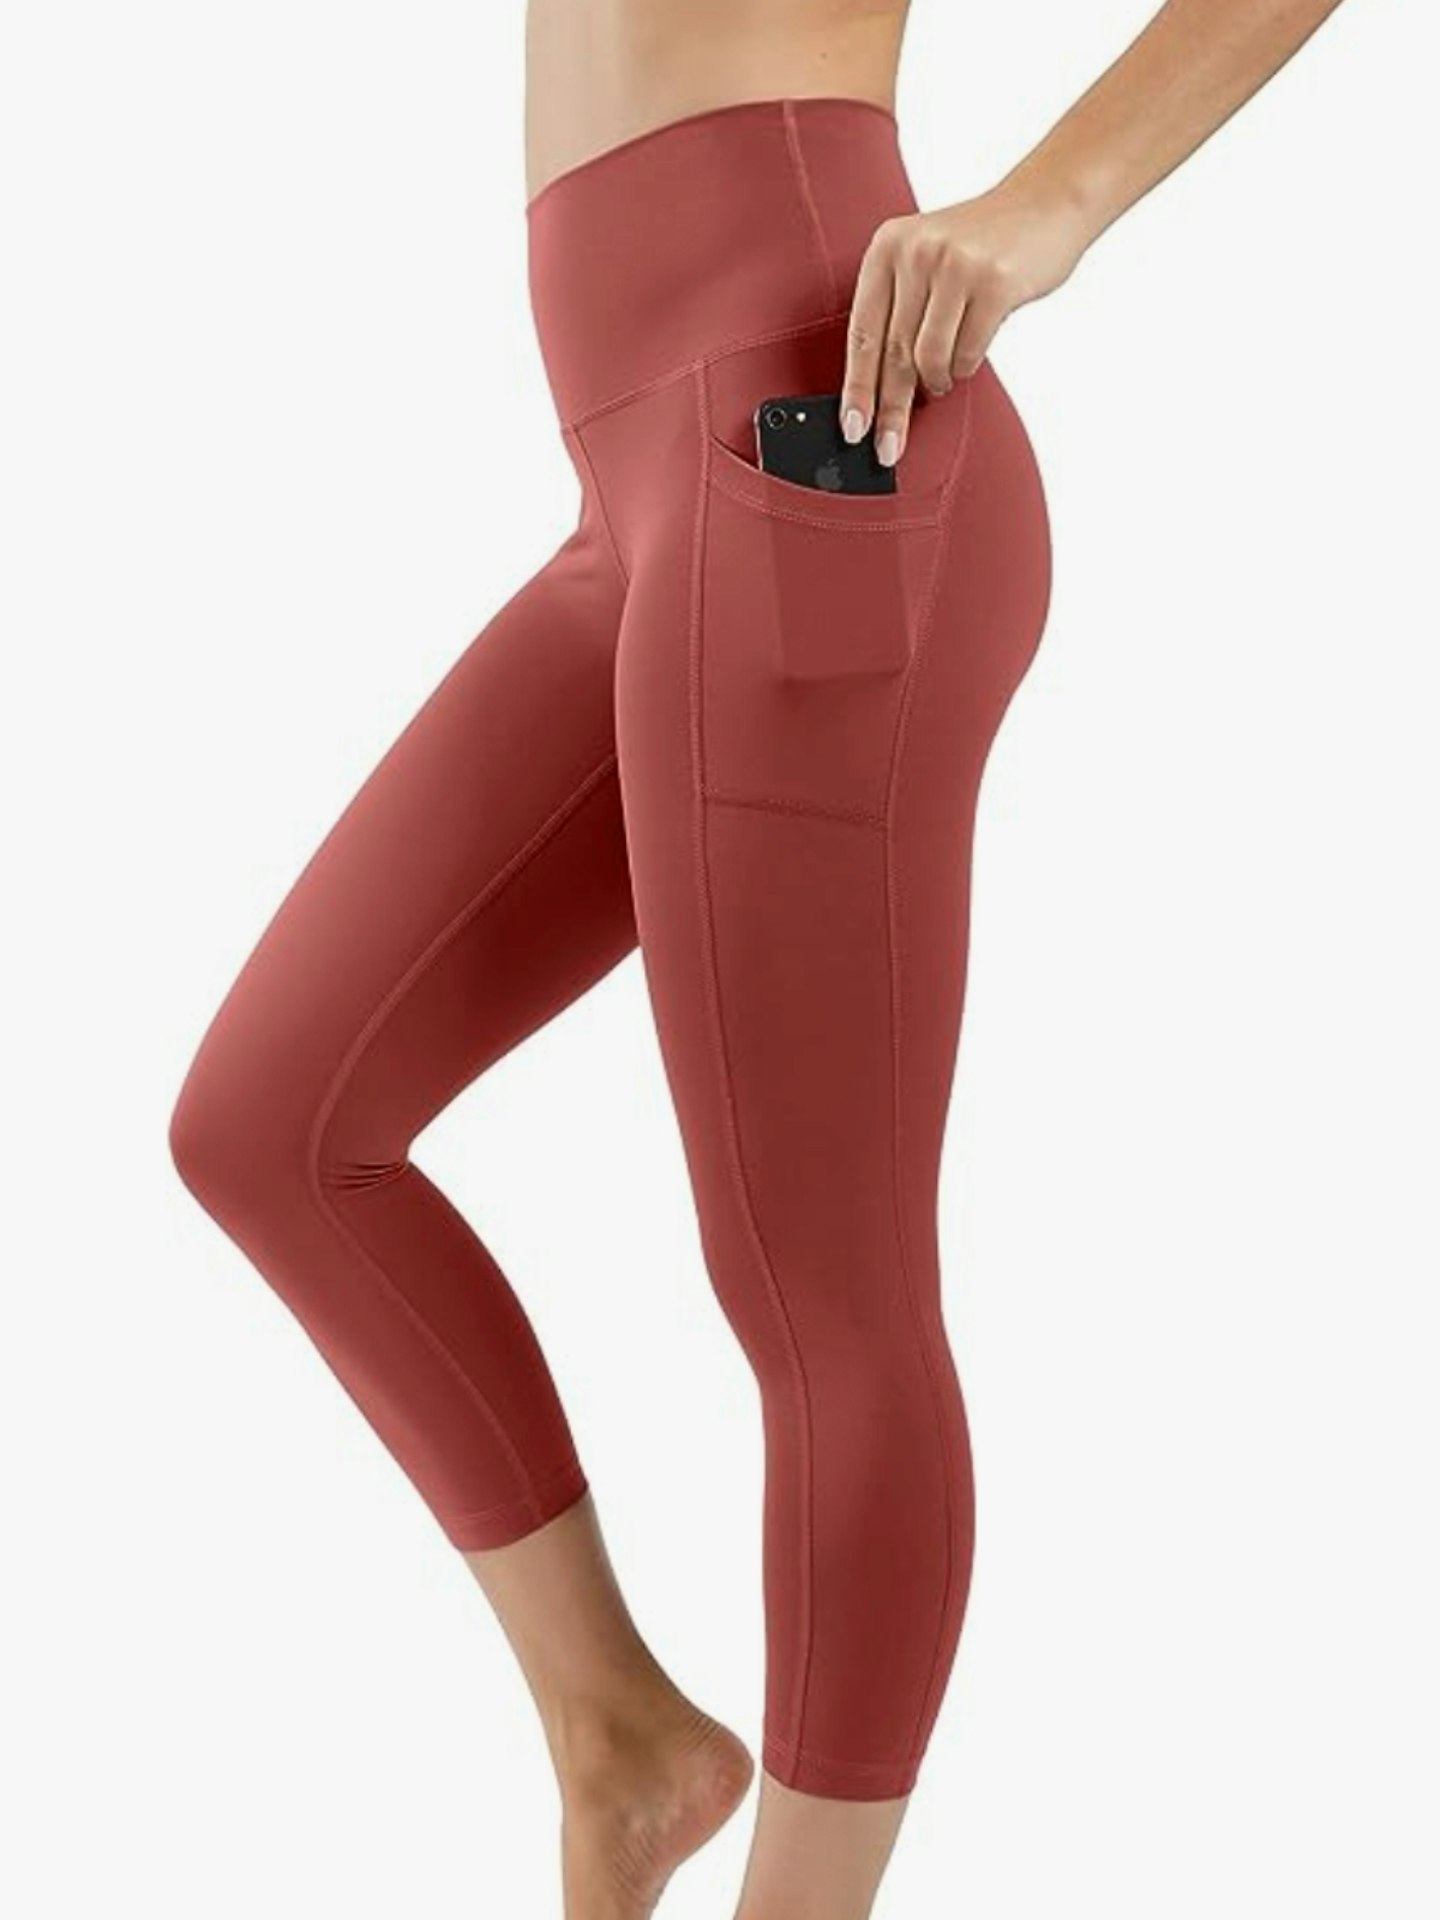 90 DEGREE by REFLEX Women's High Waist Leggings with Side Pockets, Rouge  Blush